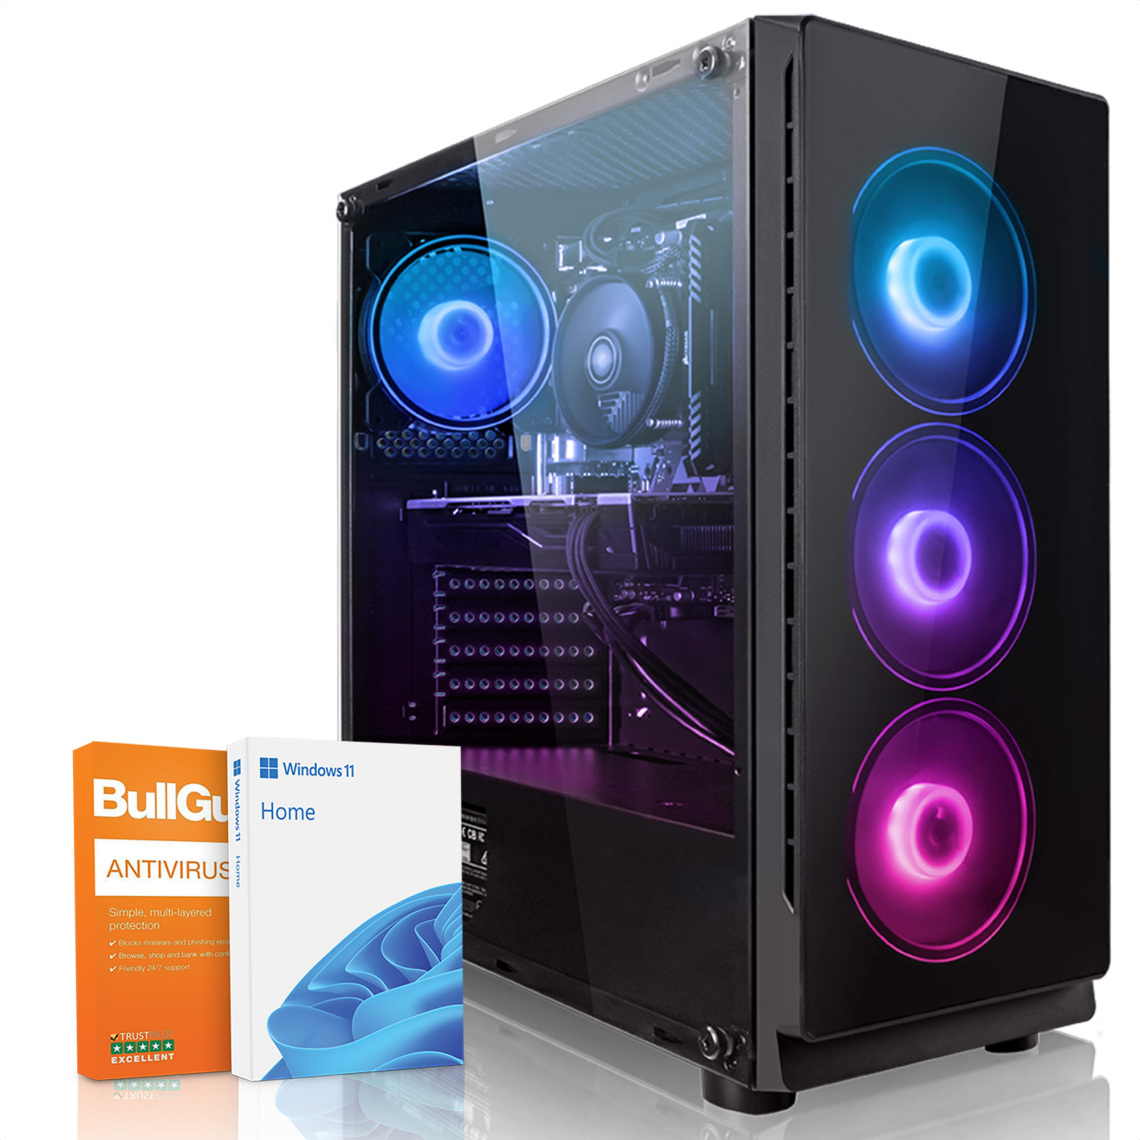 Megaport - PC Gamer Carbon • AMD Ryzen 5 4500 6x 3.60GHz • Nvidia Geforce RTX3060 • 16Go DDR4 • 250Go M.2 SSD • 1To HDD • WiFi • 1805-FR - PC Fixe Gamer